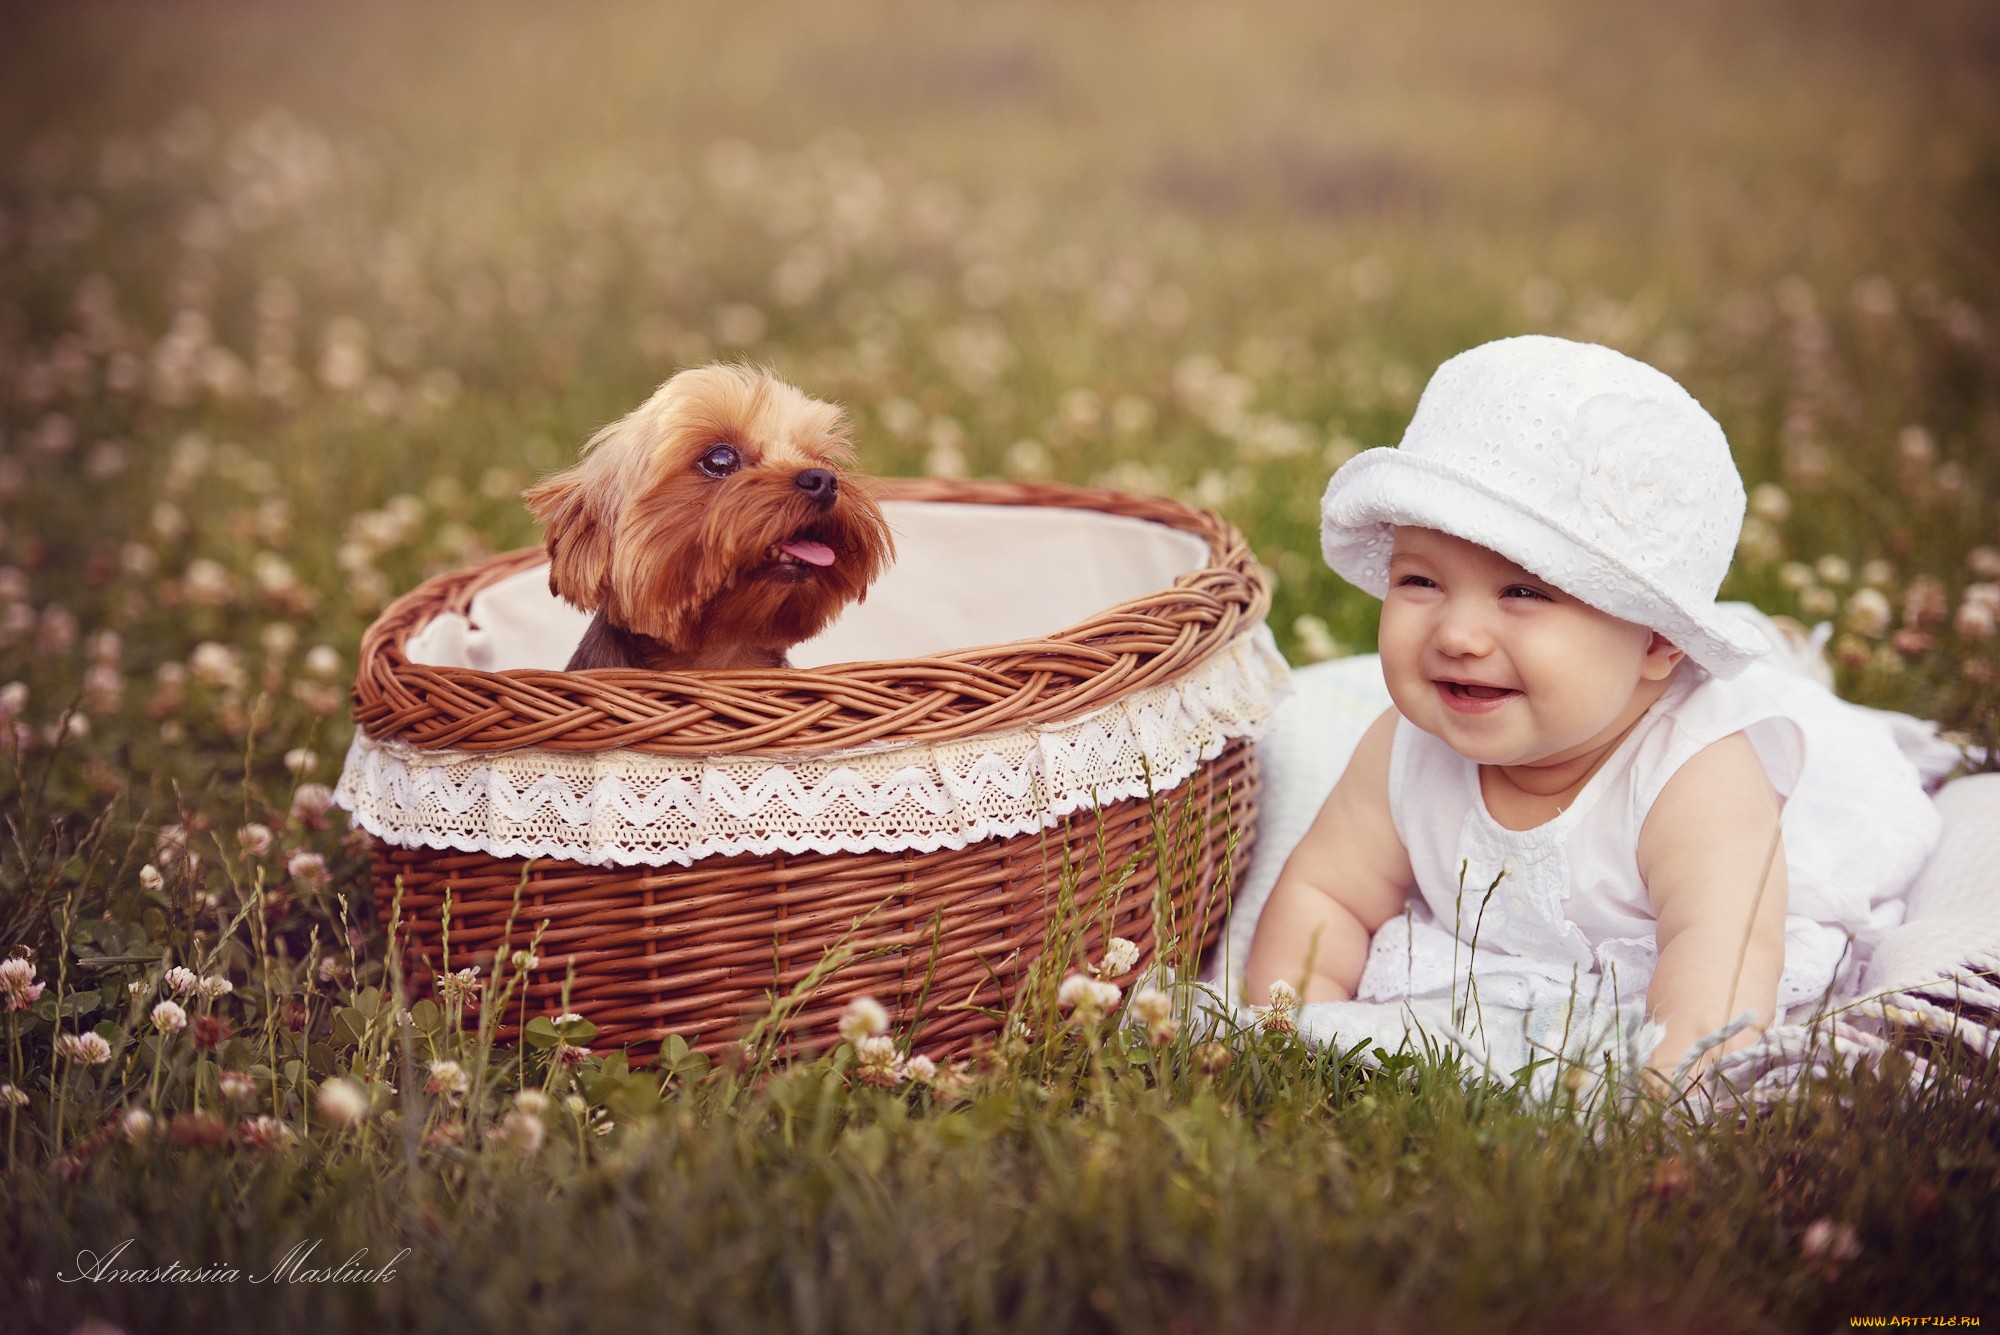 Free download wallpaper Photography, Baby on your PC desktop